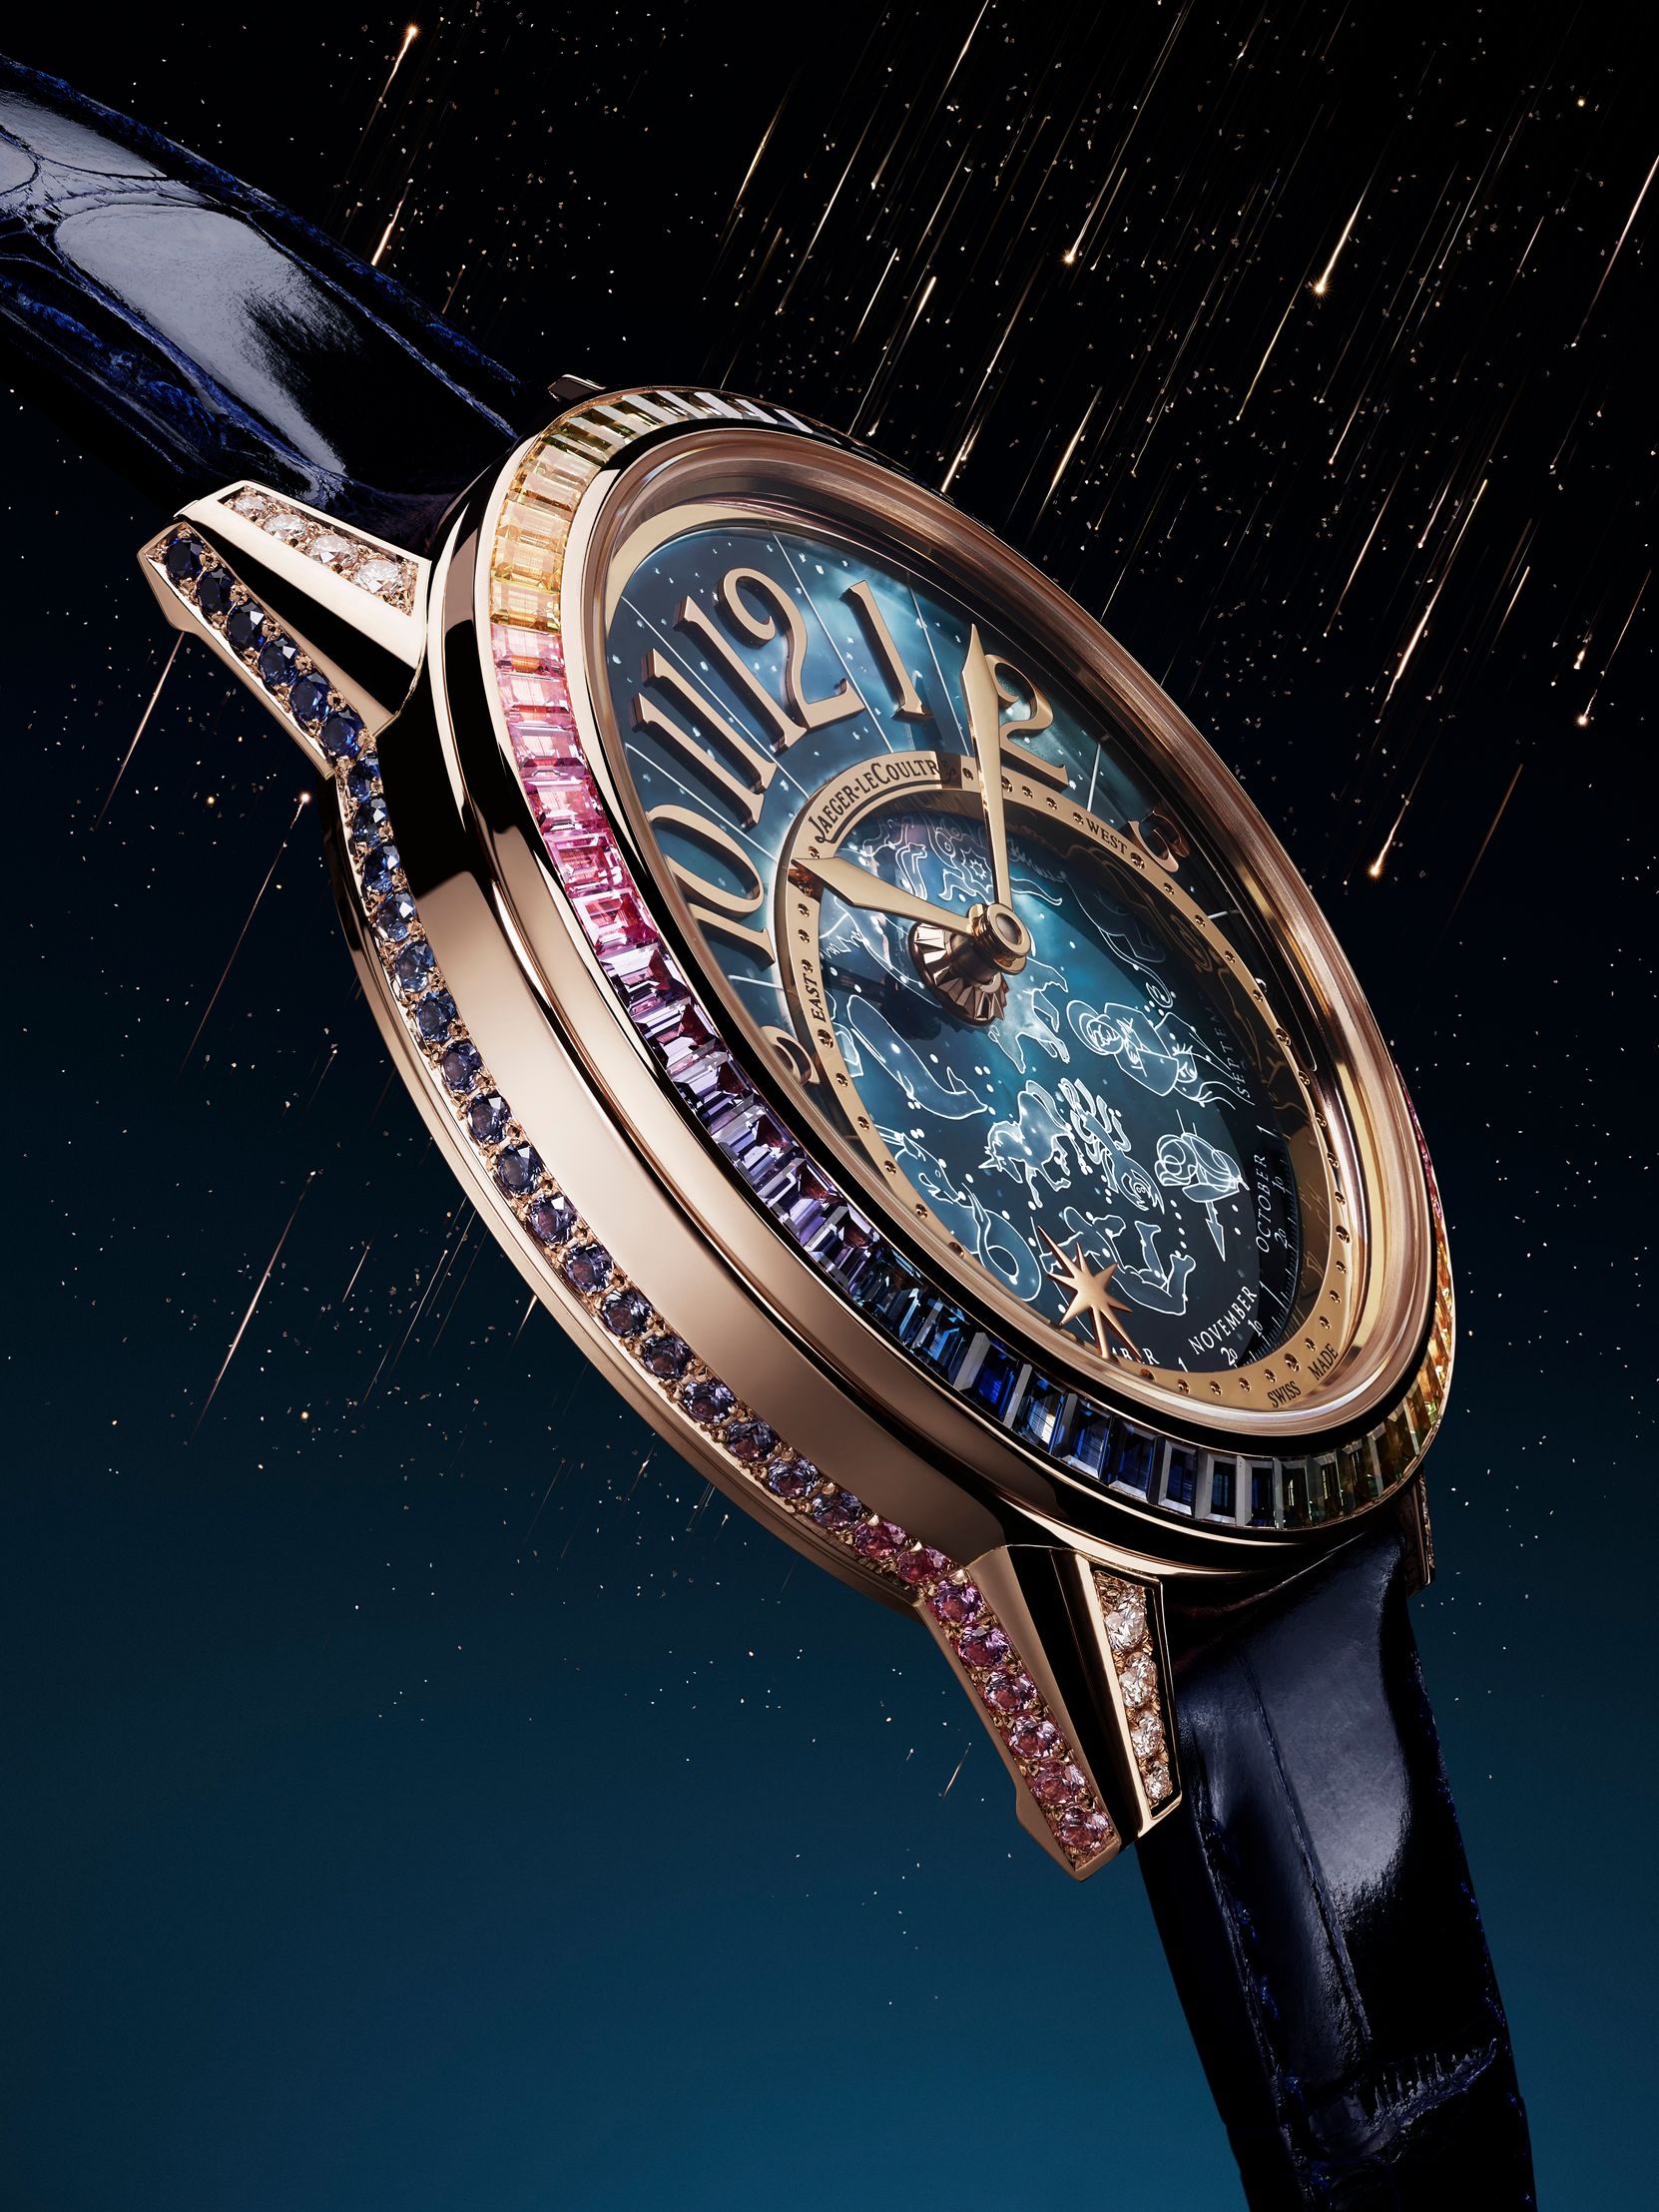 The New Jaeger-LeCoultre Rendez-Vous Celestial Watch Looks to Get in on the Rainbow Daytona Craze